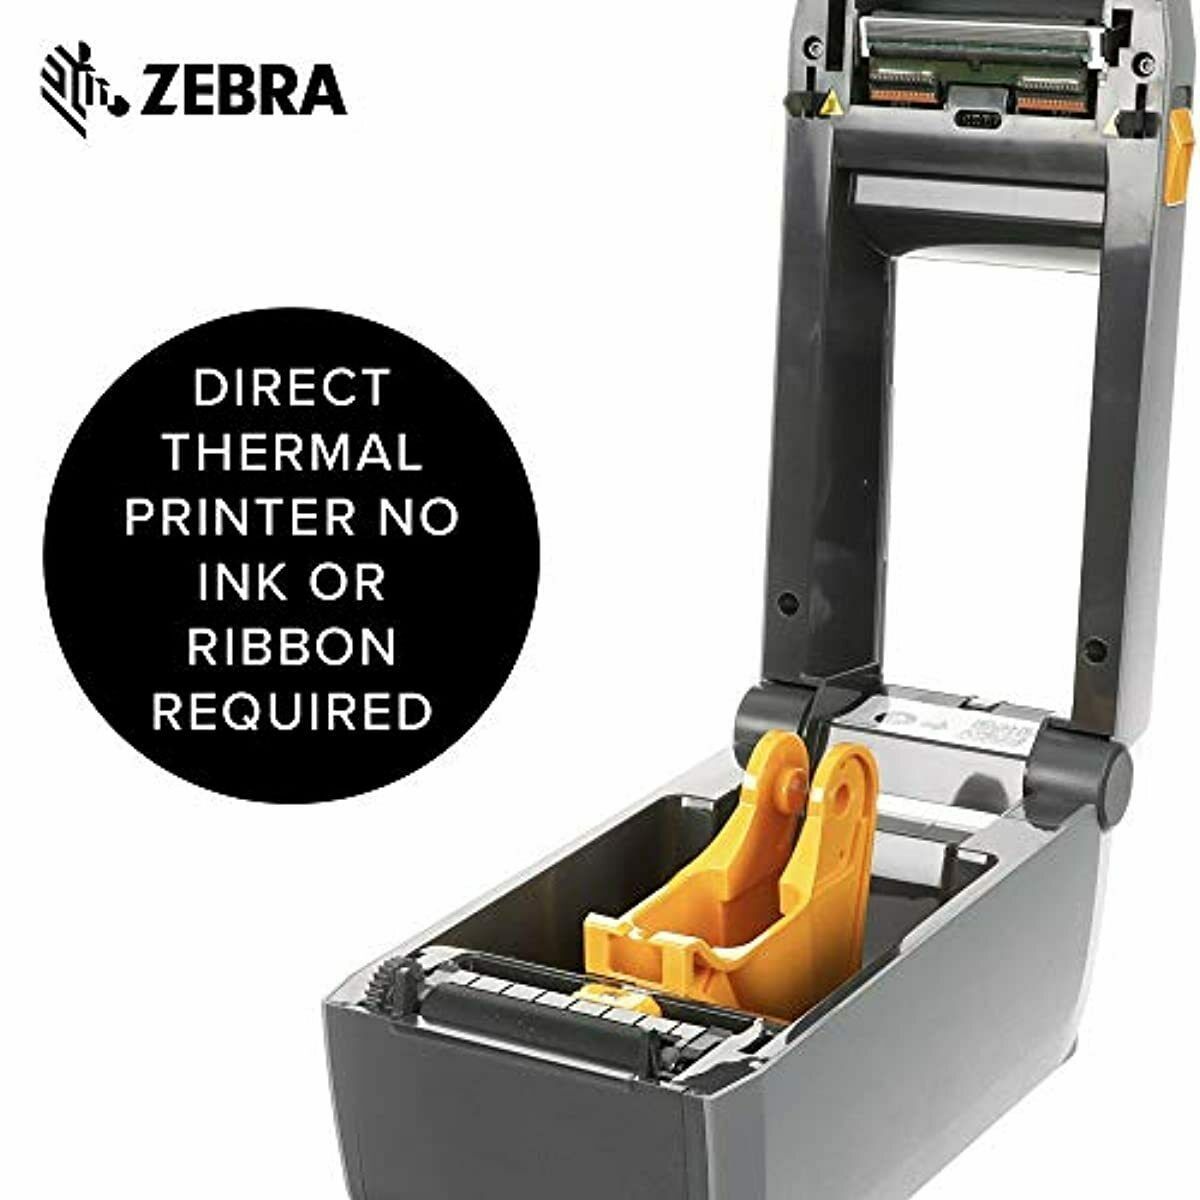 Zebra Zd410 Direct Thermal Desktop Printer For Labels Receipts Barcodes Tag Printers 2693